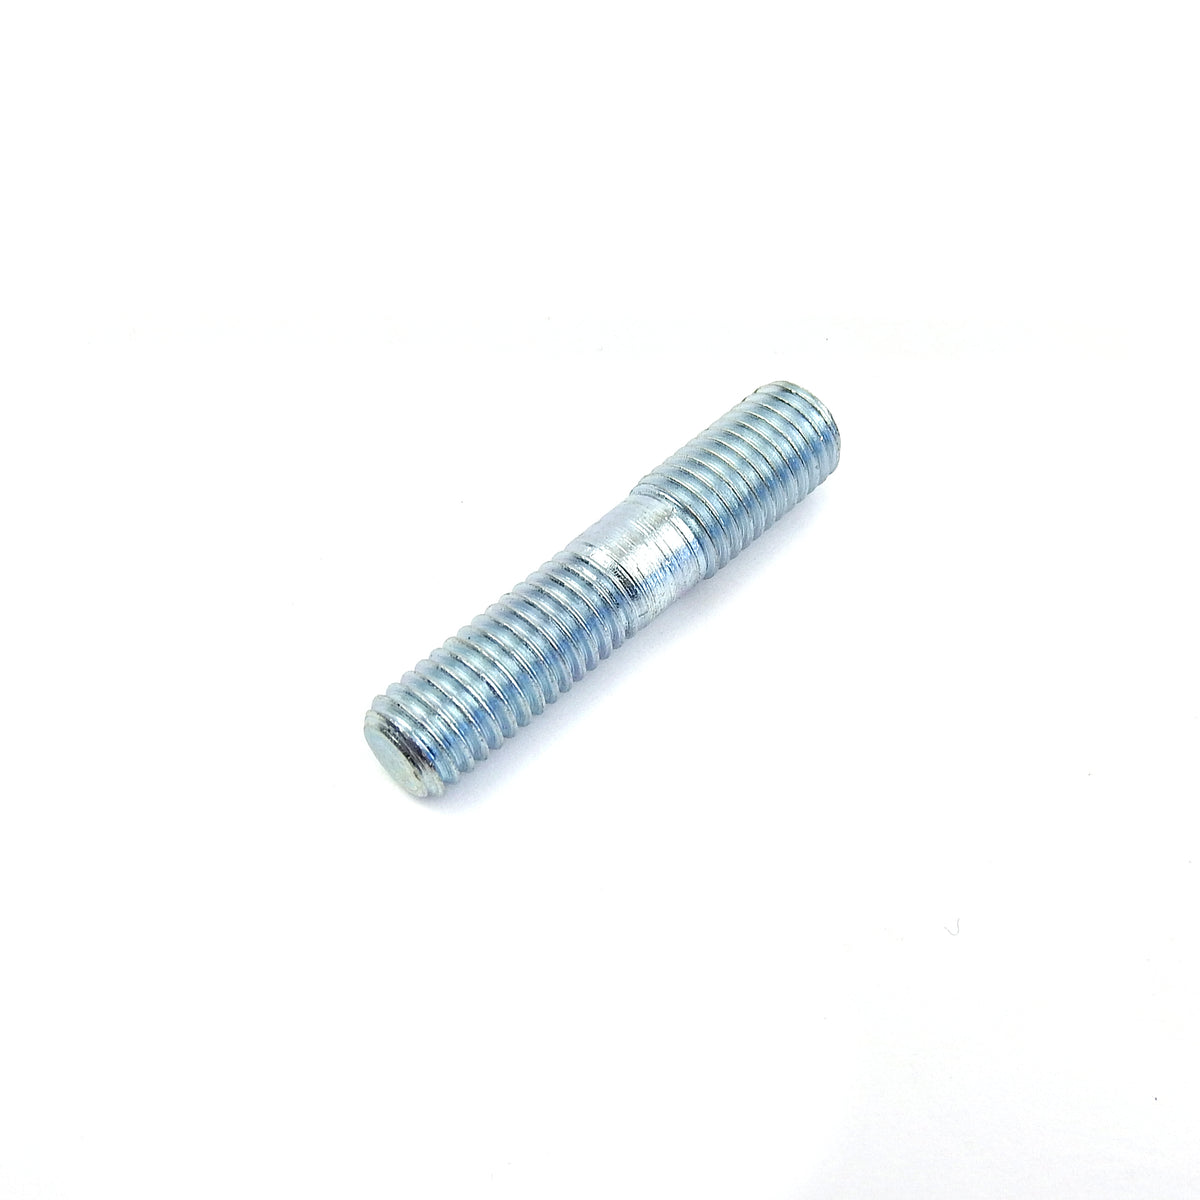 Fastener Repair Stud 8mm to 9mm 41mm in Long size with Zinc Plating